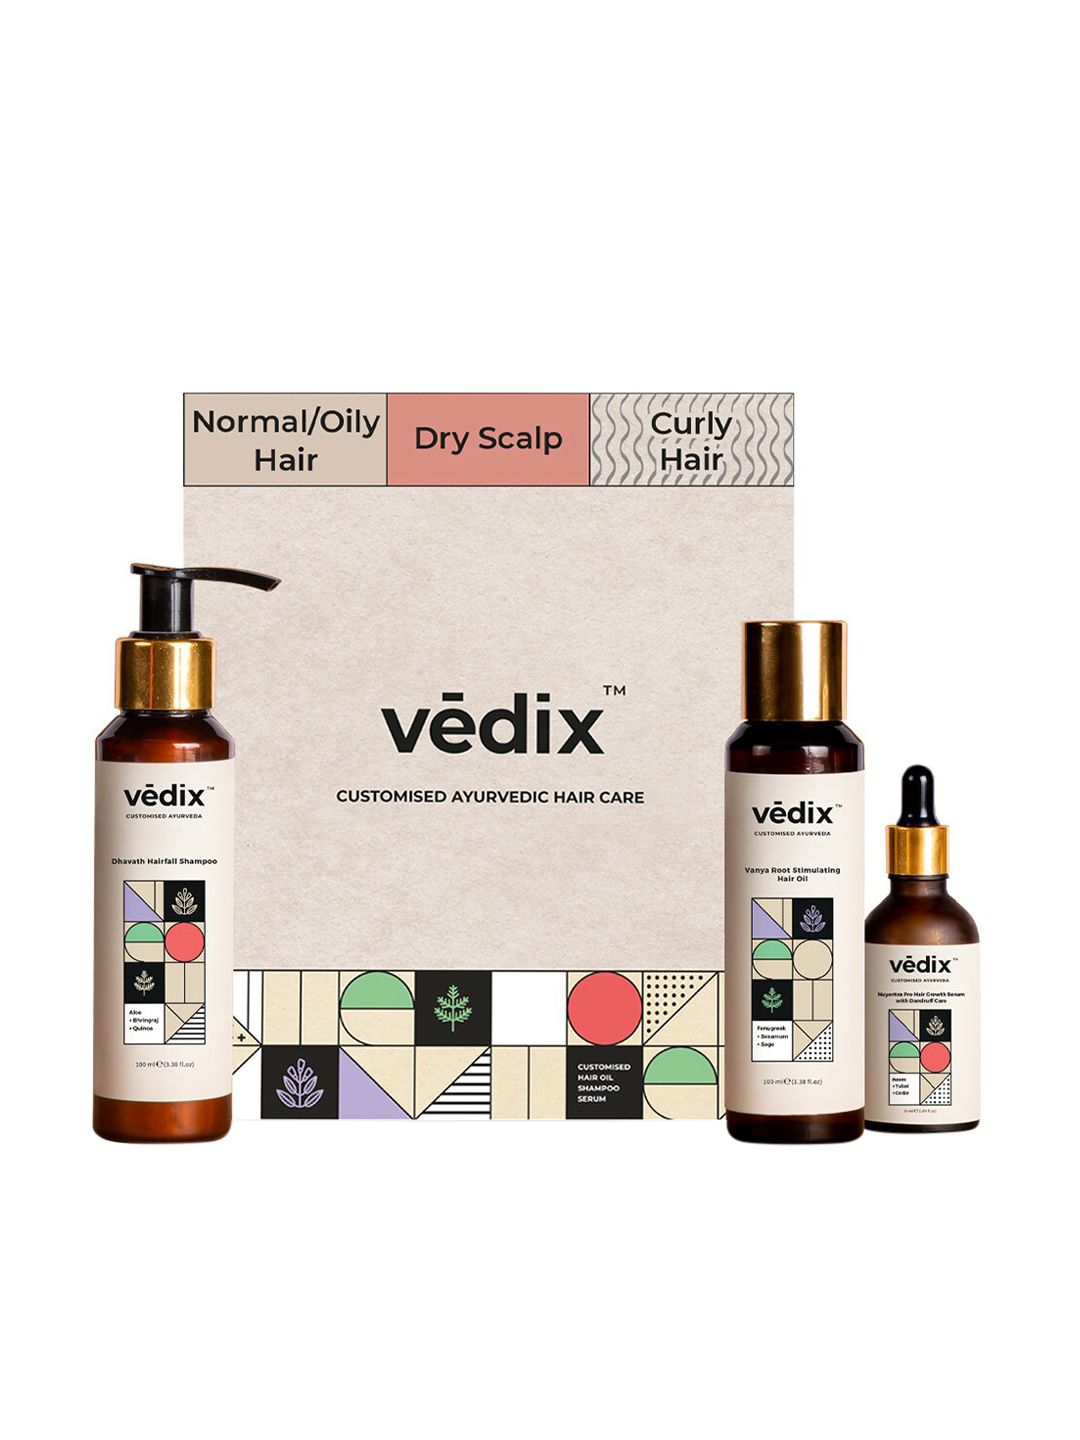 VEDIX Customized Hair Fall Control Regimen for Dry Hair - Dry Scalp & Curly Hair Price in India